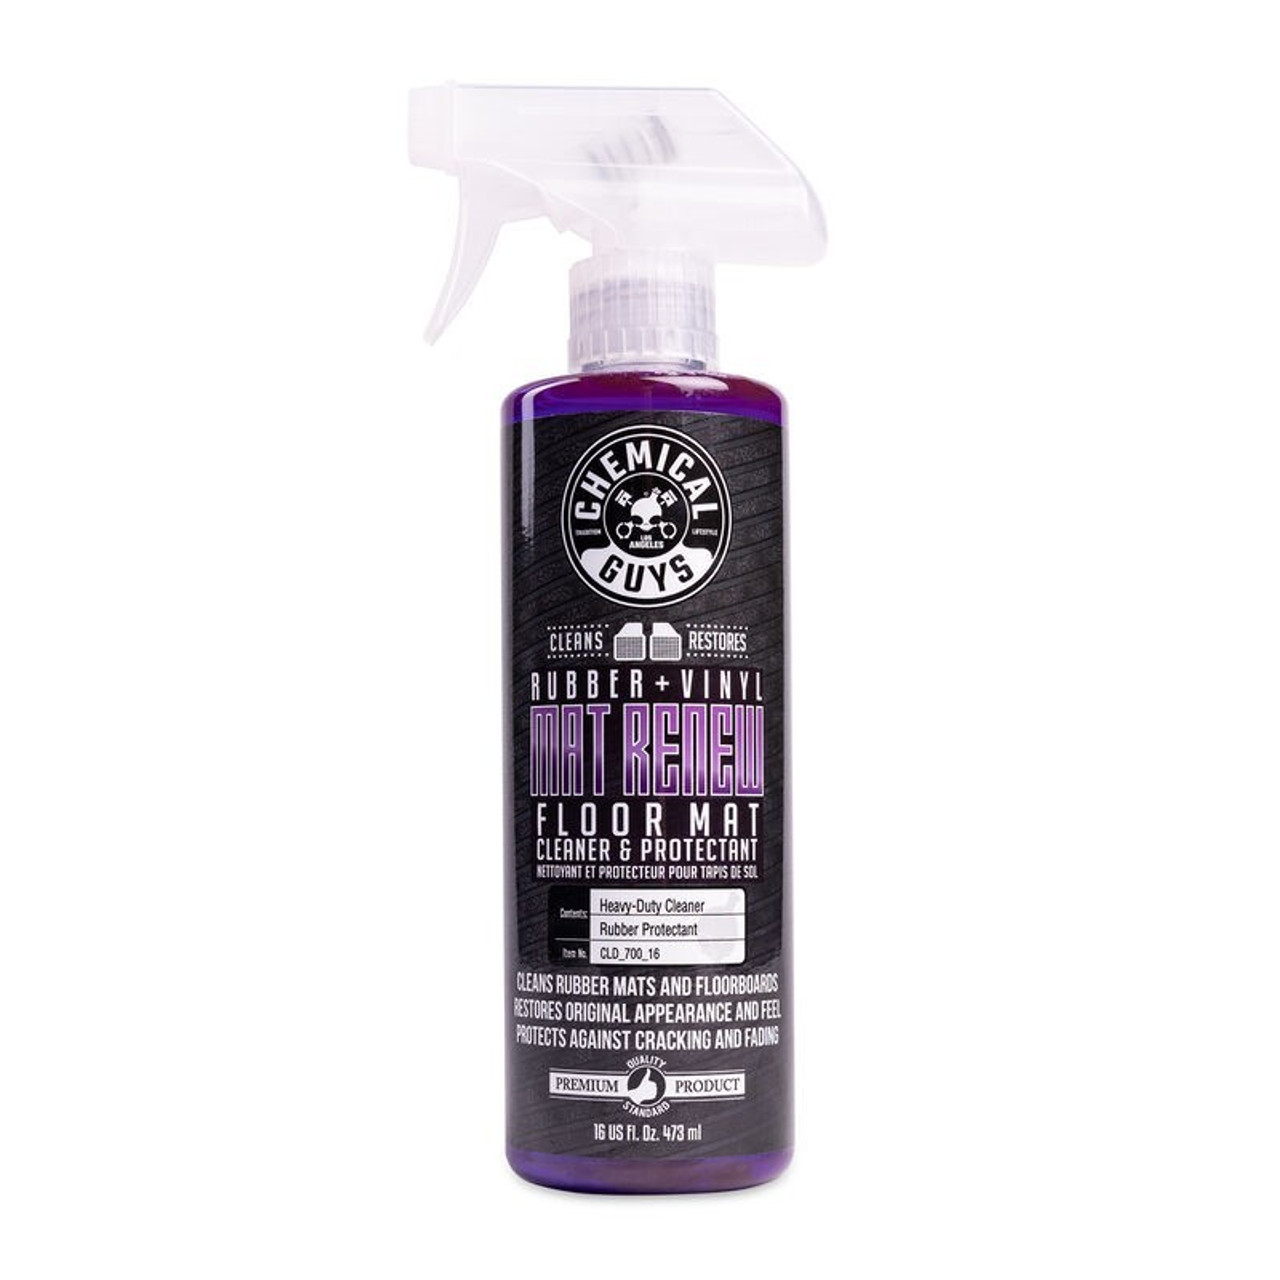 Chemical Guys 16oz Total Interior Cleaner & Protectant - Black Cherry